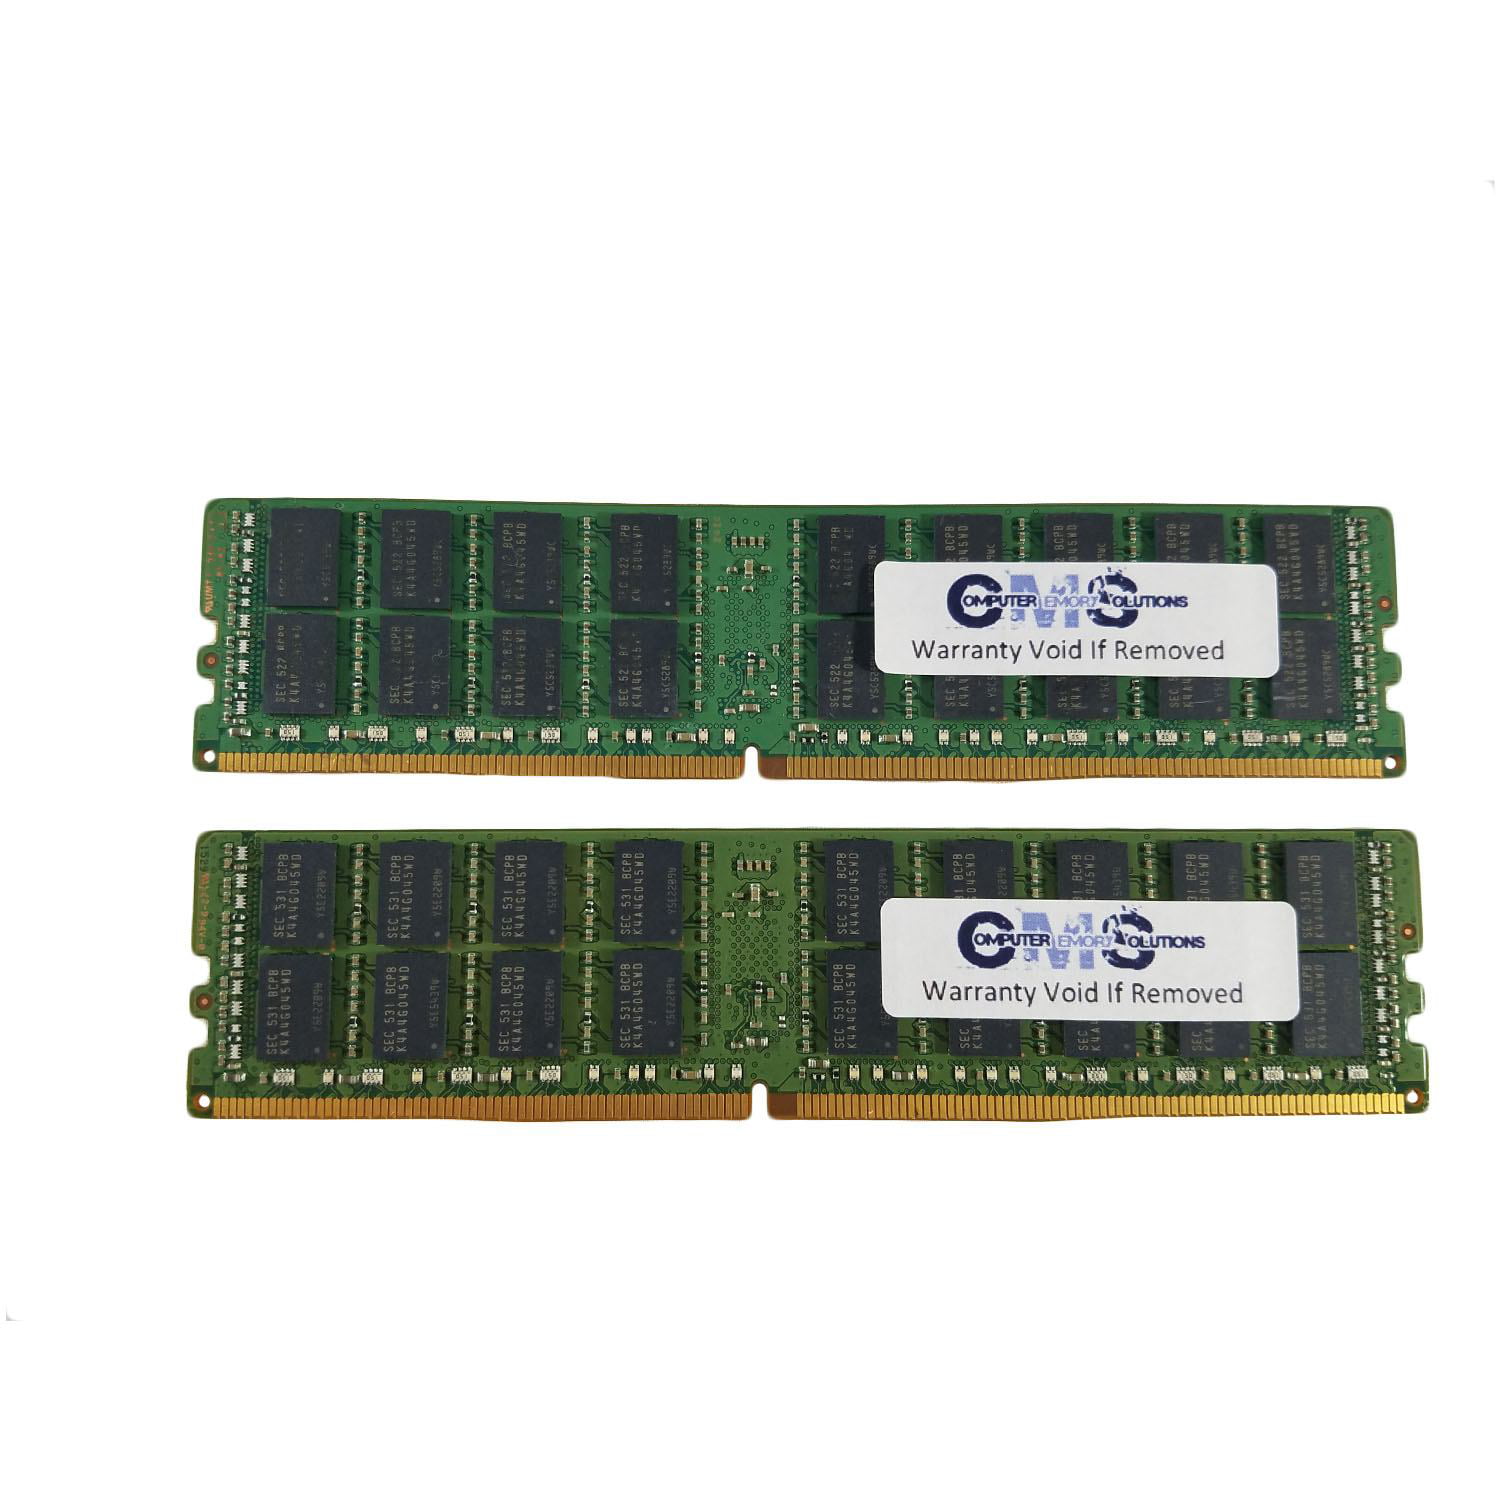 PARTS-QUICK Brand 16GB Memory for Supermicro SuperServer 1029U-TRT DDR4 PC4 2400MHz ECC Registered DIMM 